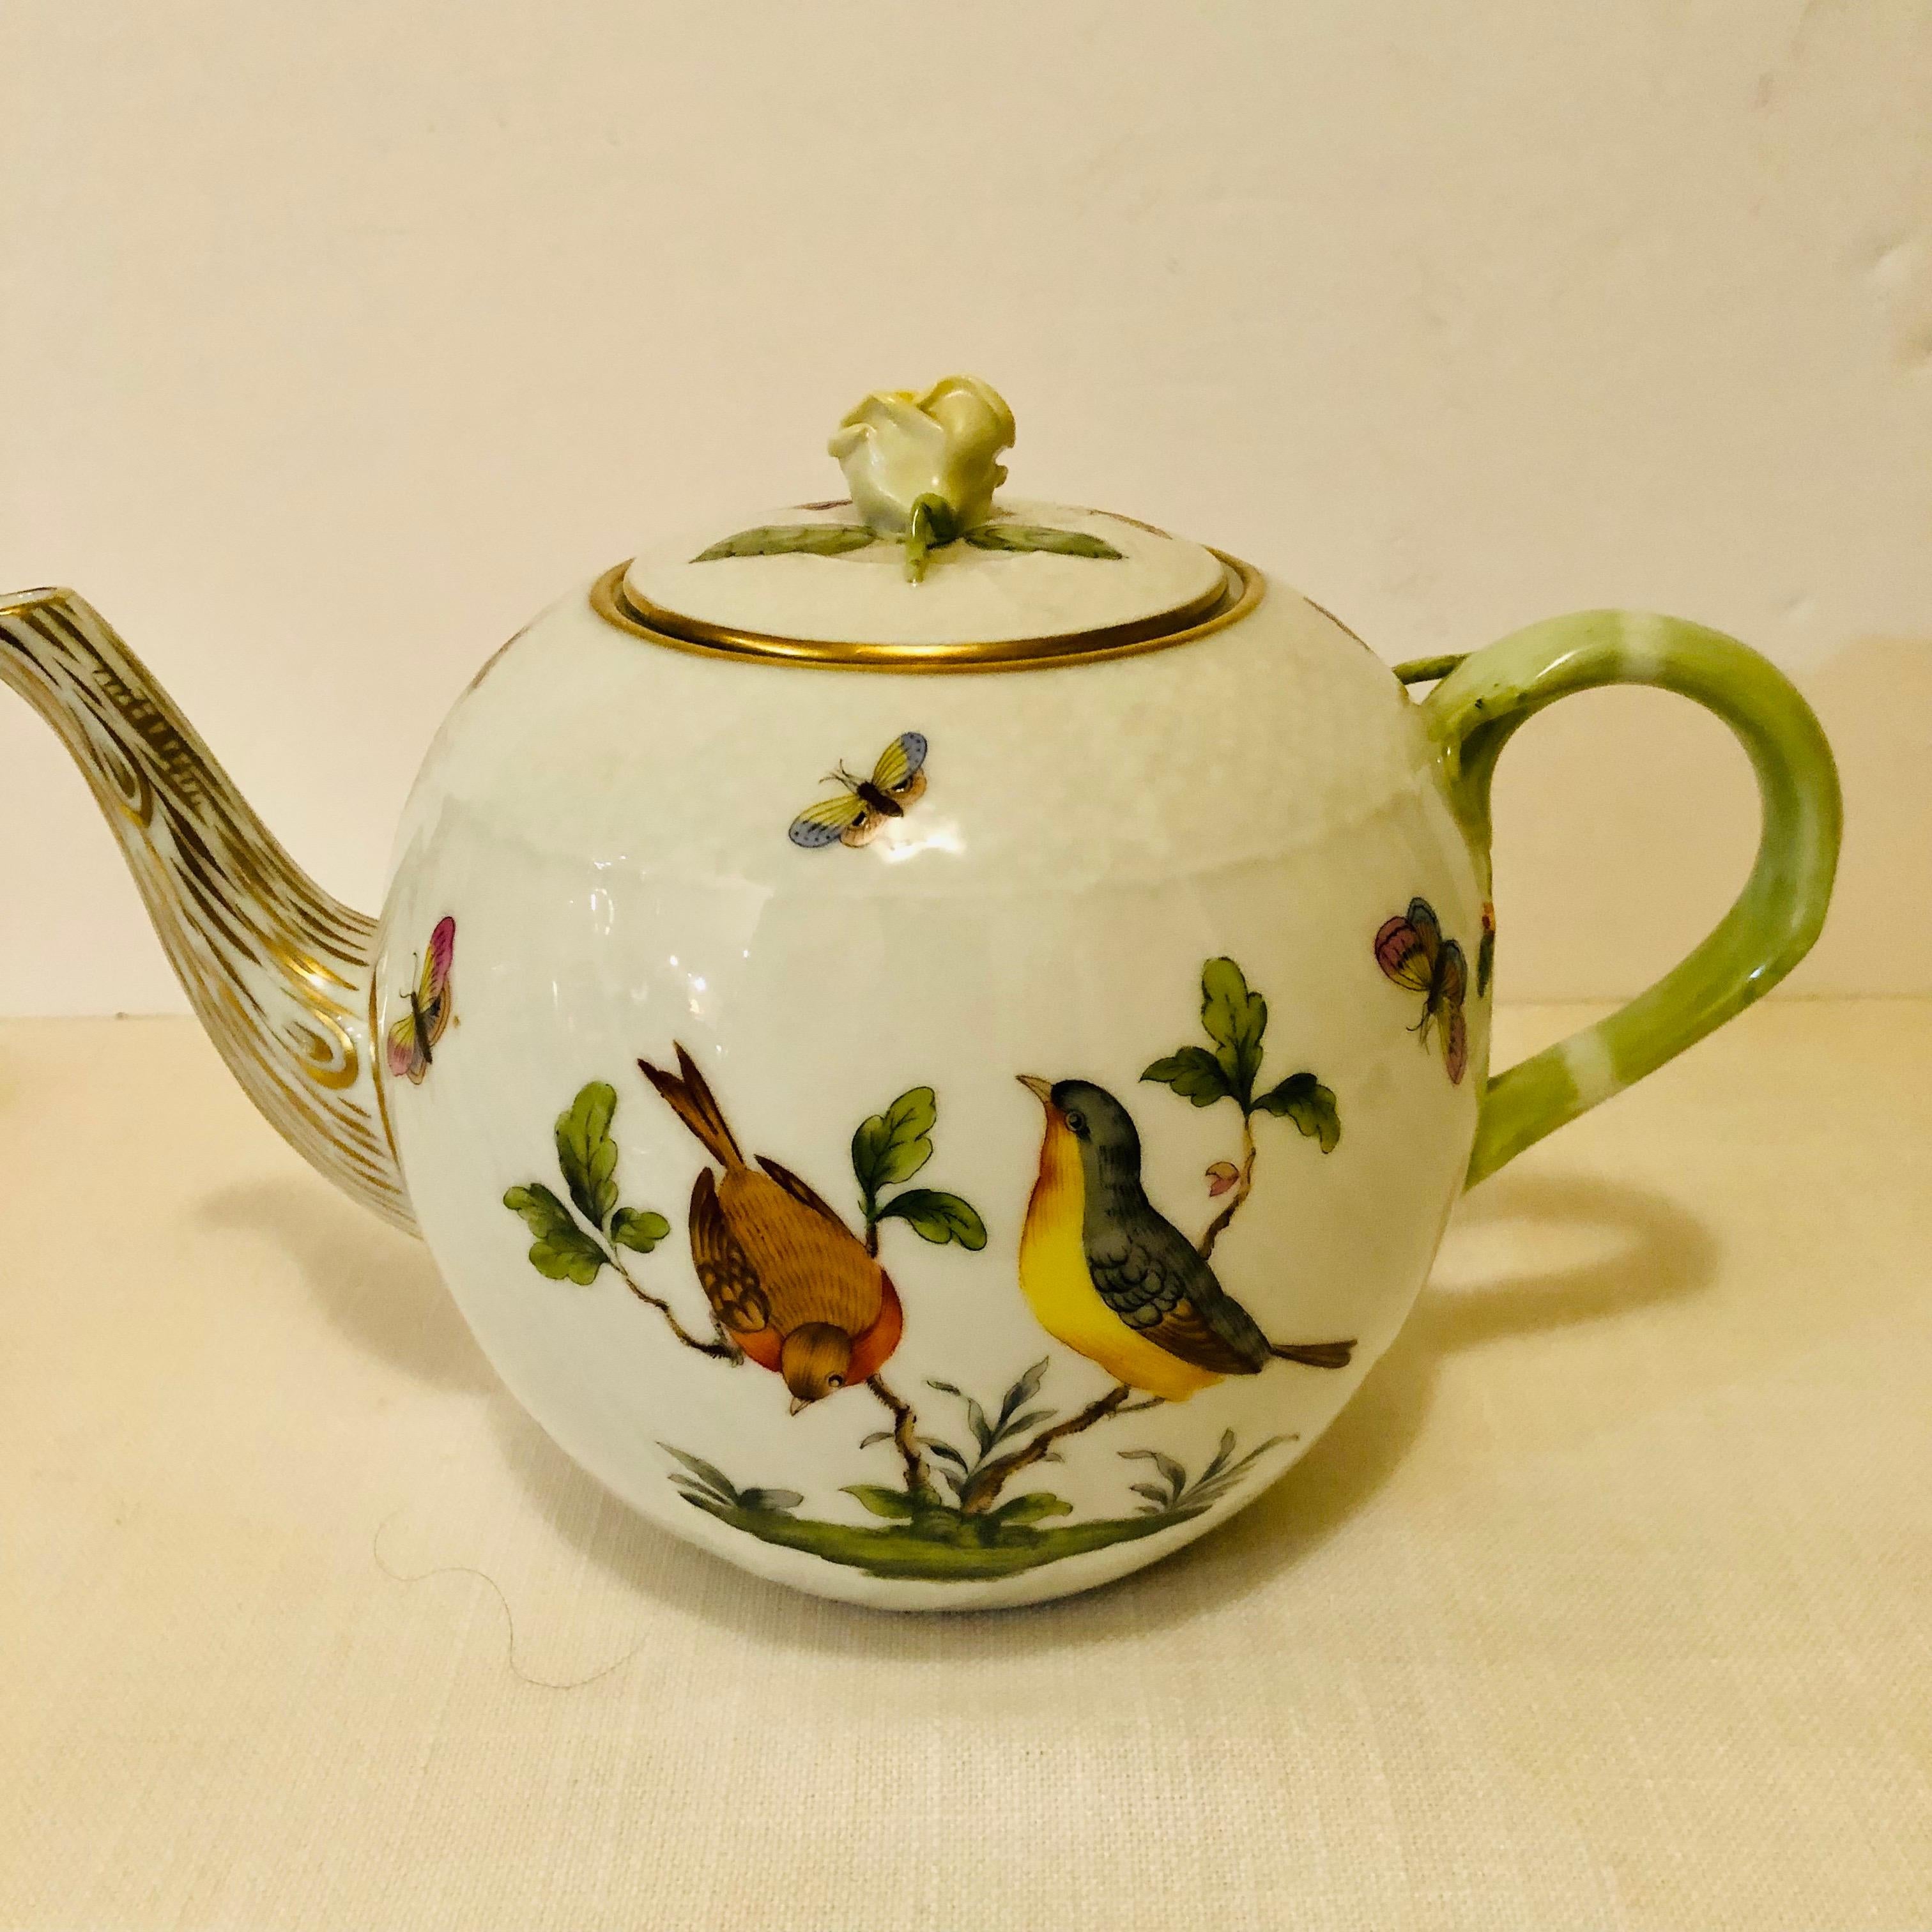 Hungarian Large Herend Rothschild Bird Teapot Painted with Birds, Butterflies and Insects